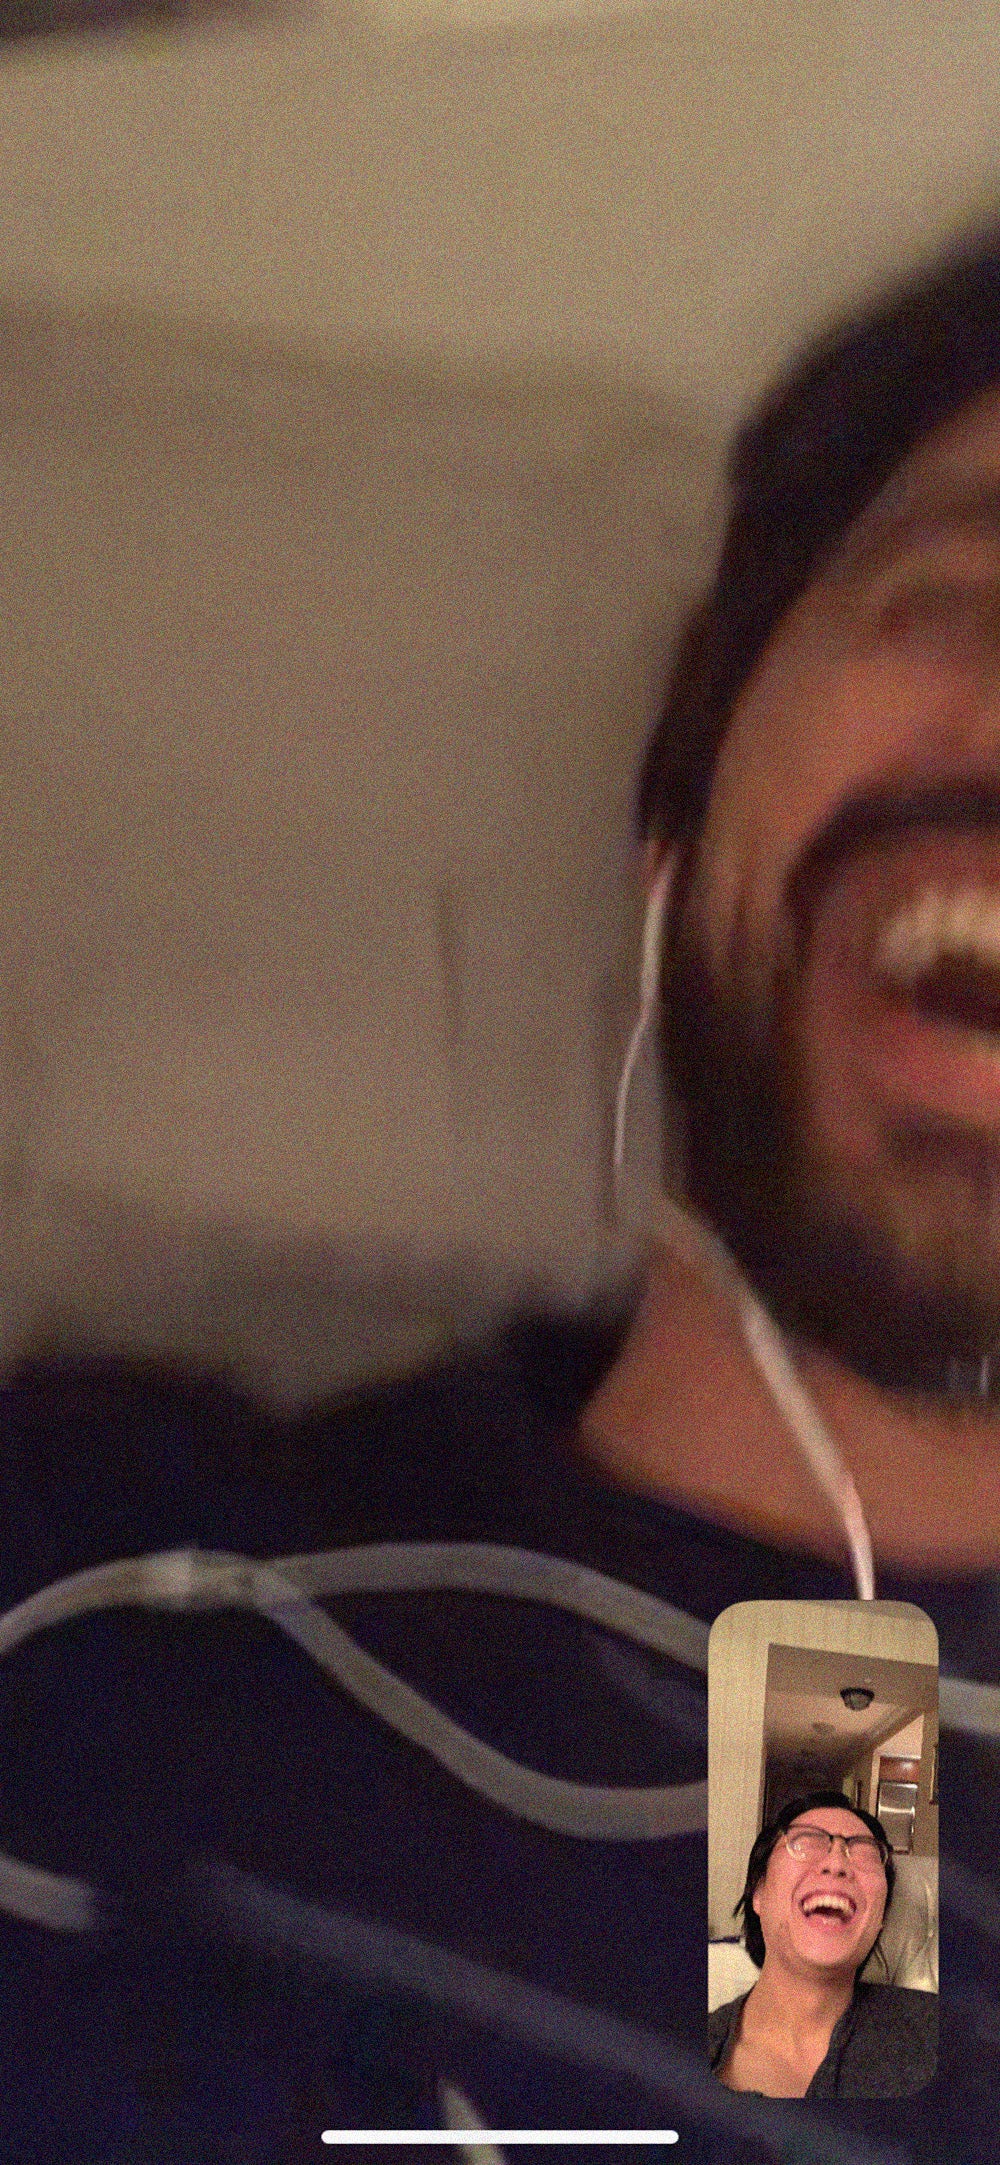 Screen cap 3 of Lawrence Le Lam laughing it up with friend on Facetime